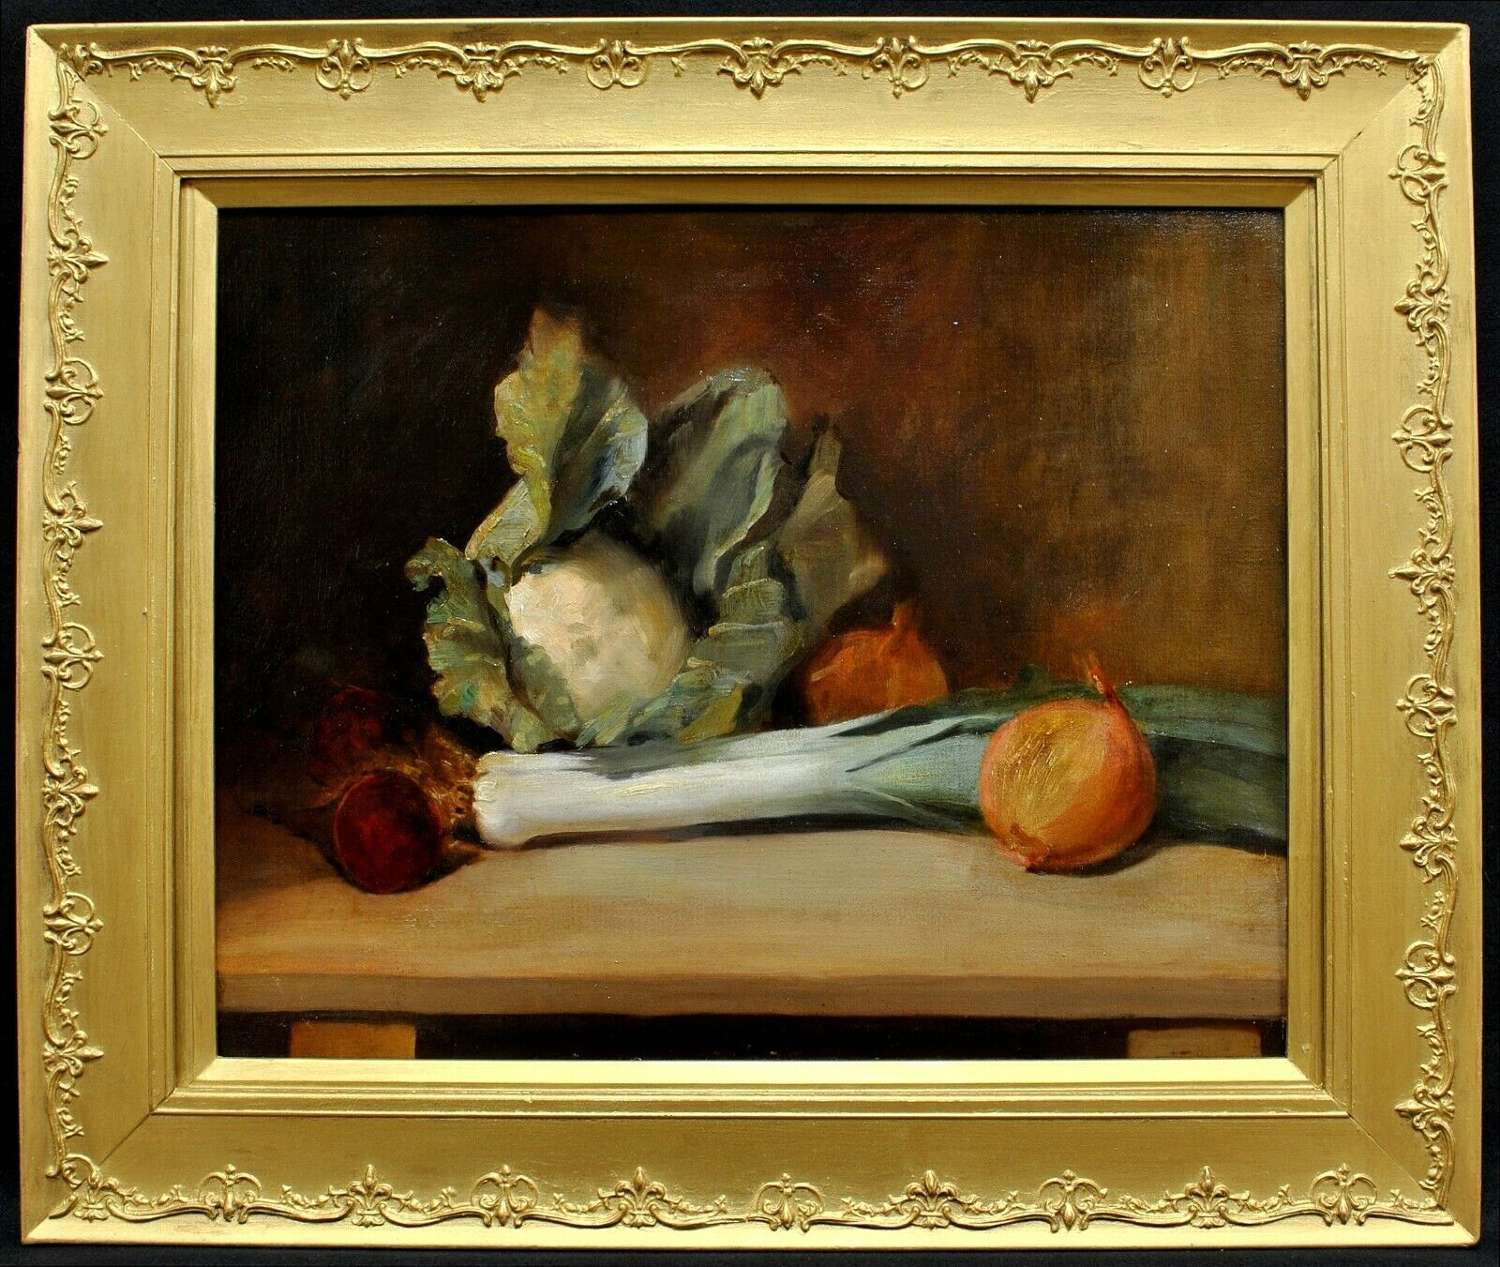 19th CENTURY KITCHEN STILL LIFE VEGETABLES ON TABLE ANTIQUE PAINTING